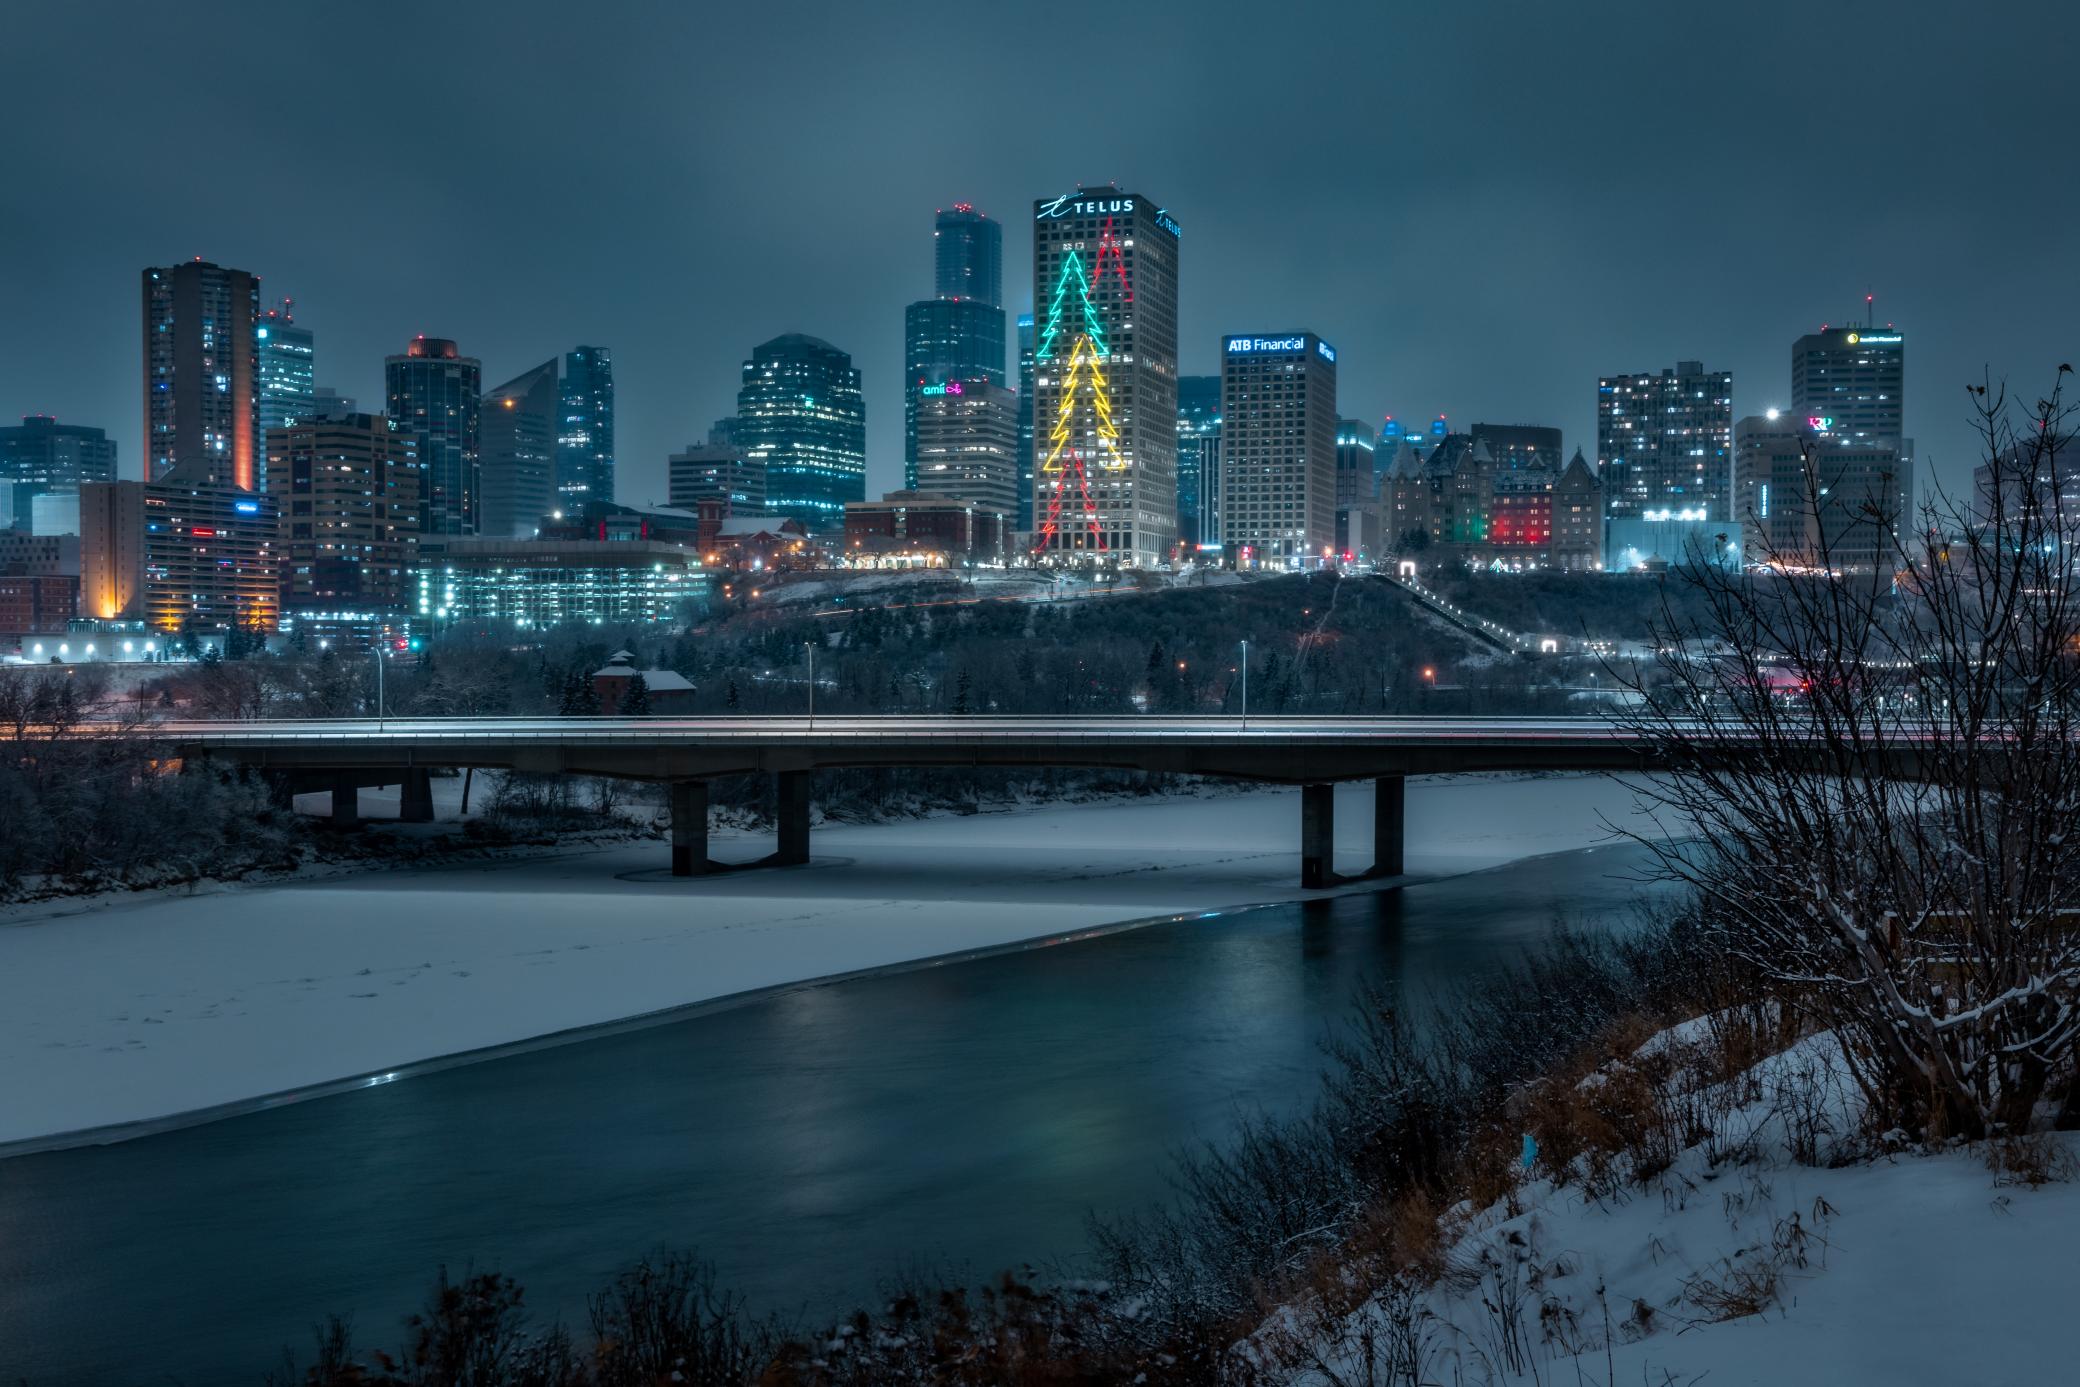 View of the Edmonton downtown skyline at night in the winter. The Christmas trees installation on the Telus building are lit up in red, green and yellow.